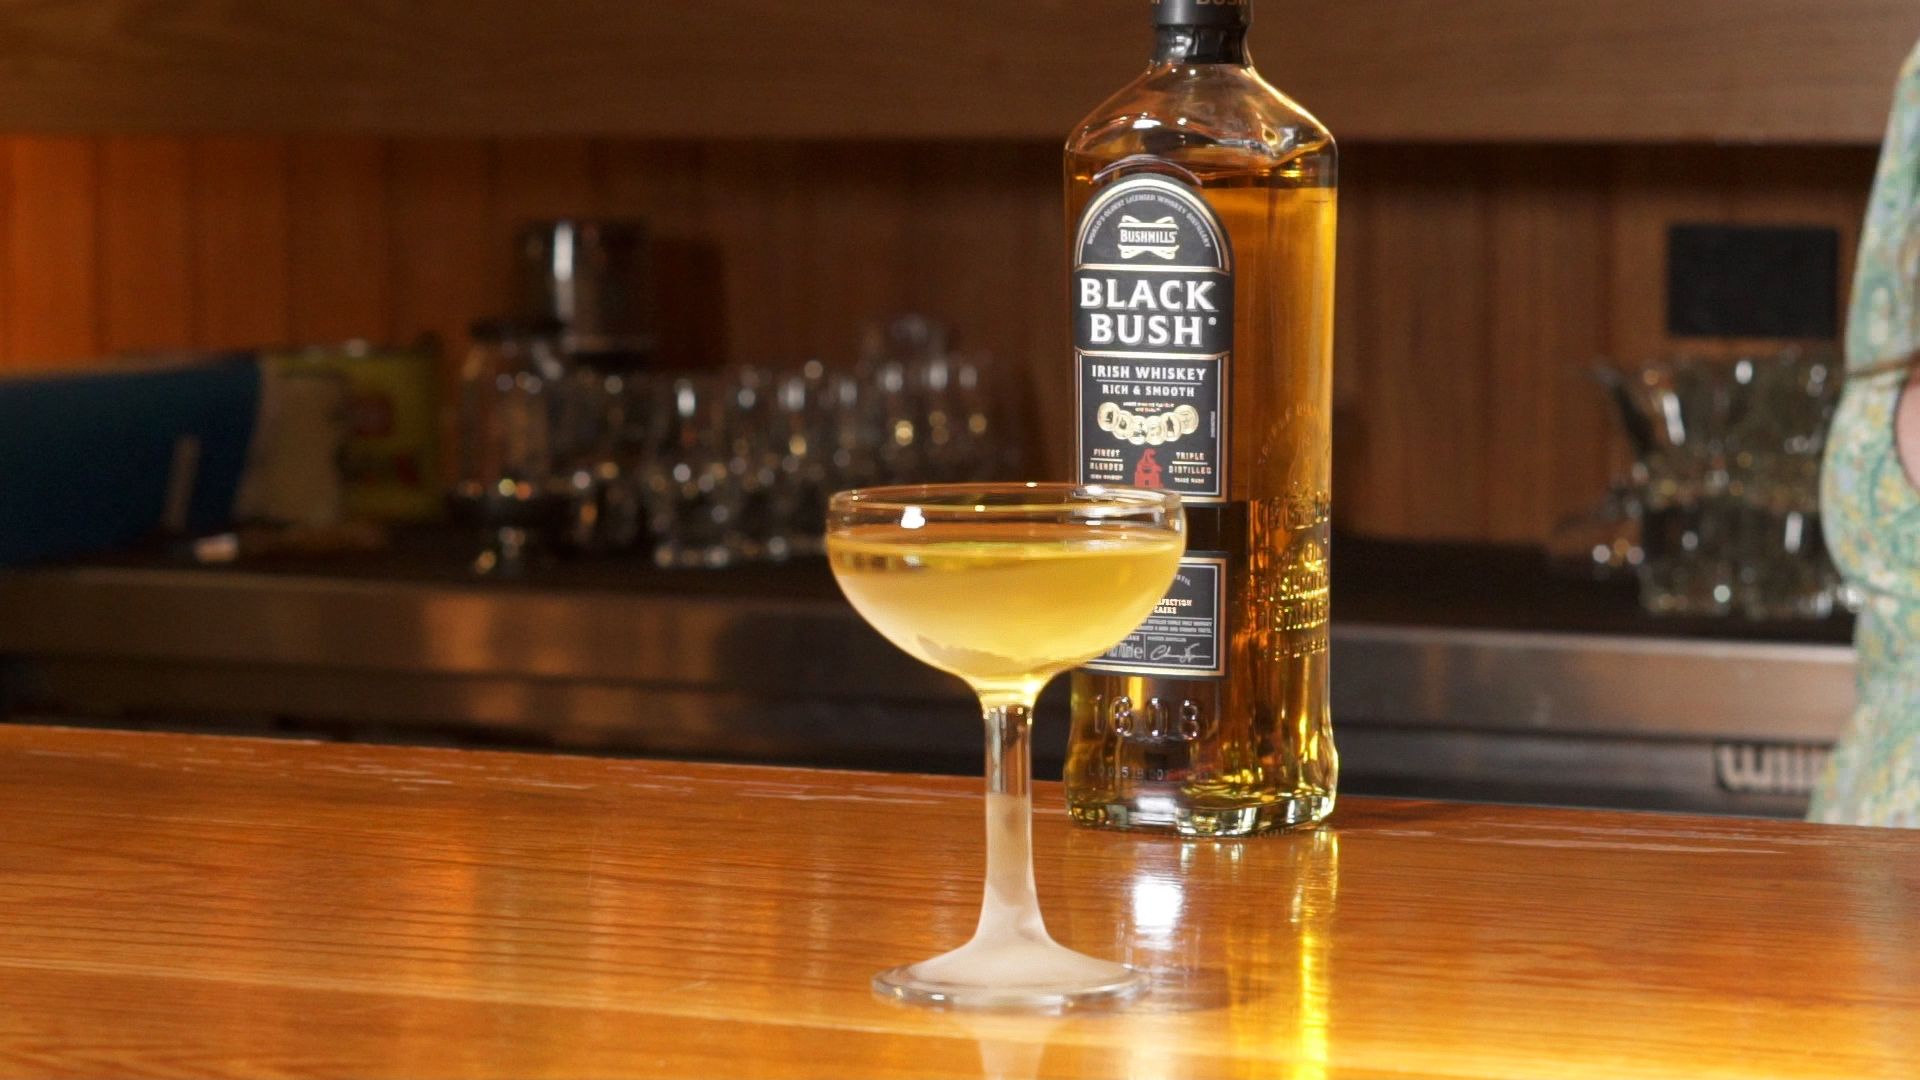 The Stinger, made with Black Bush Irish Whiskey. Photo: Boothby